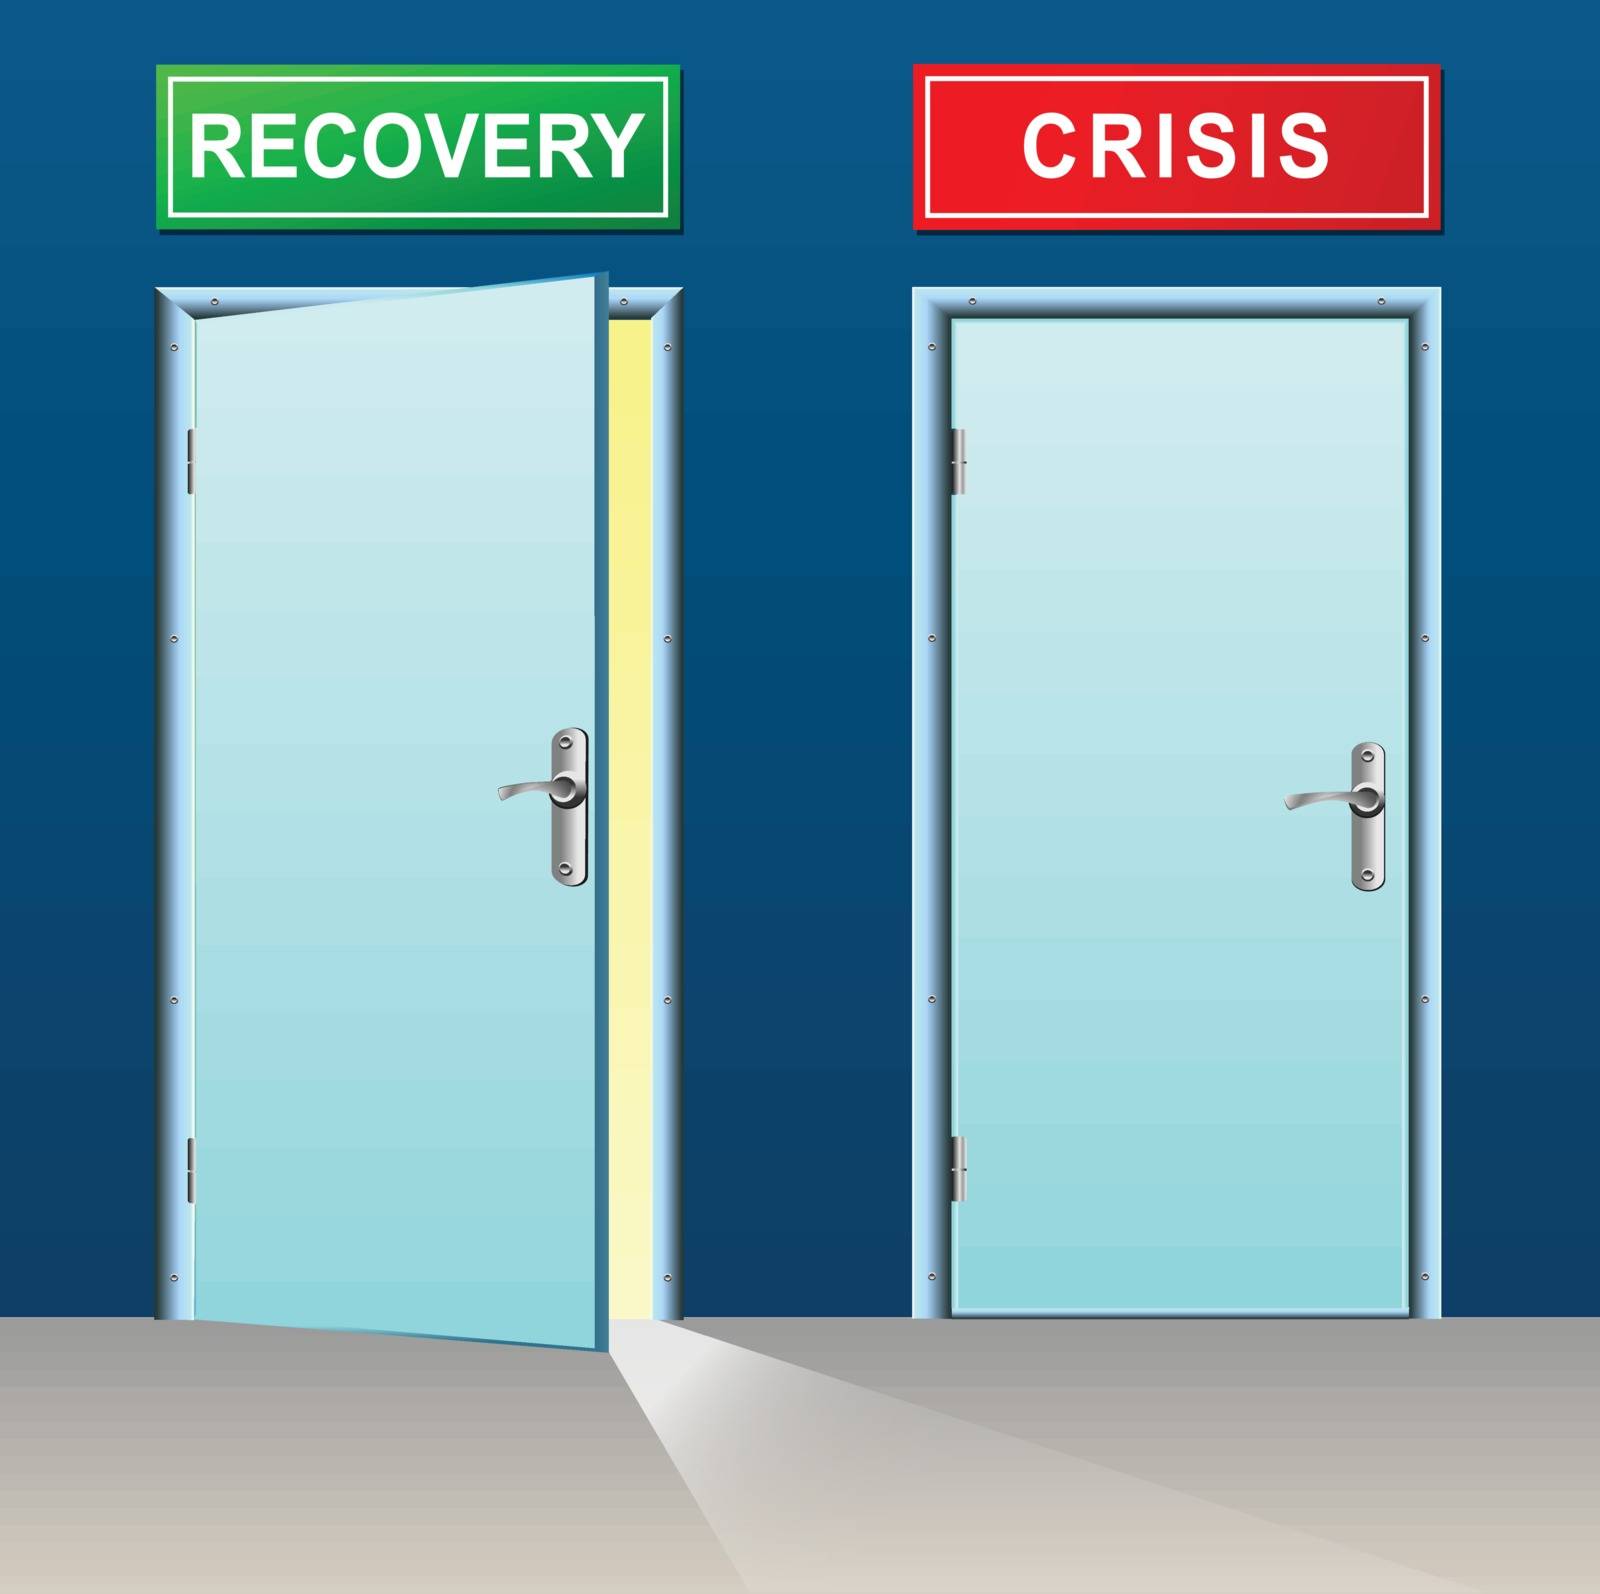 recovery and crisis doors by nickylarson974